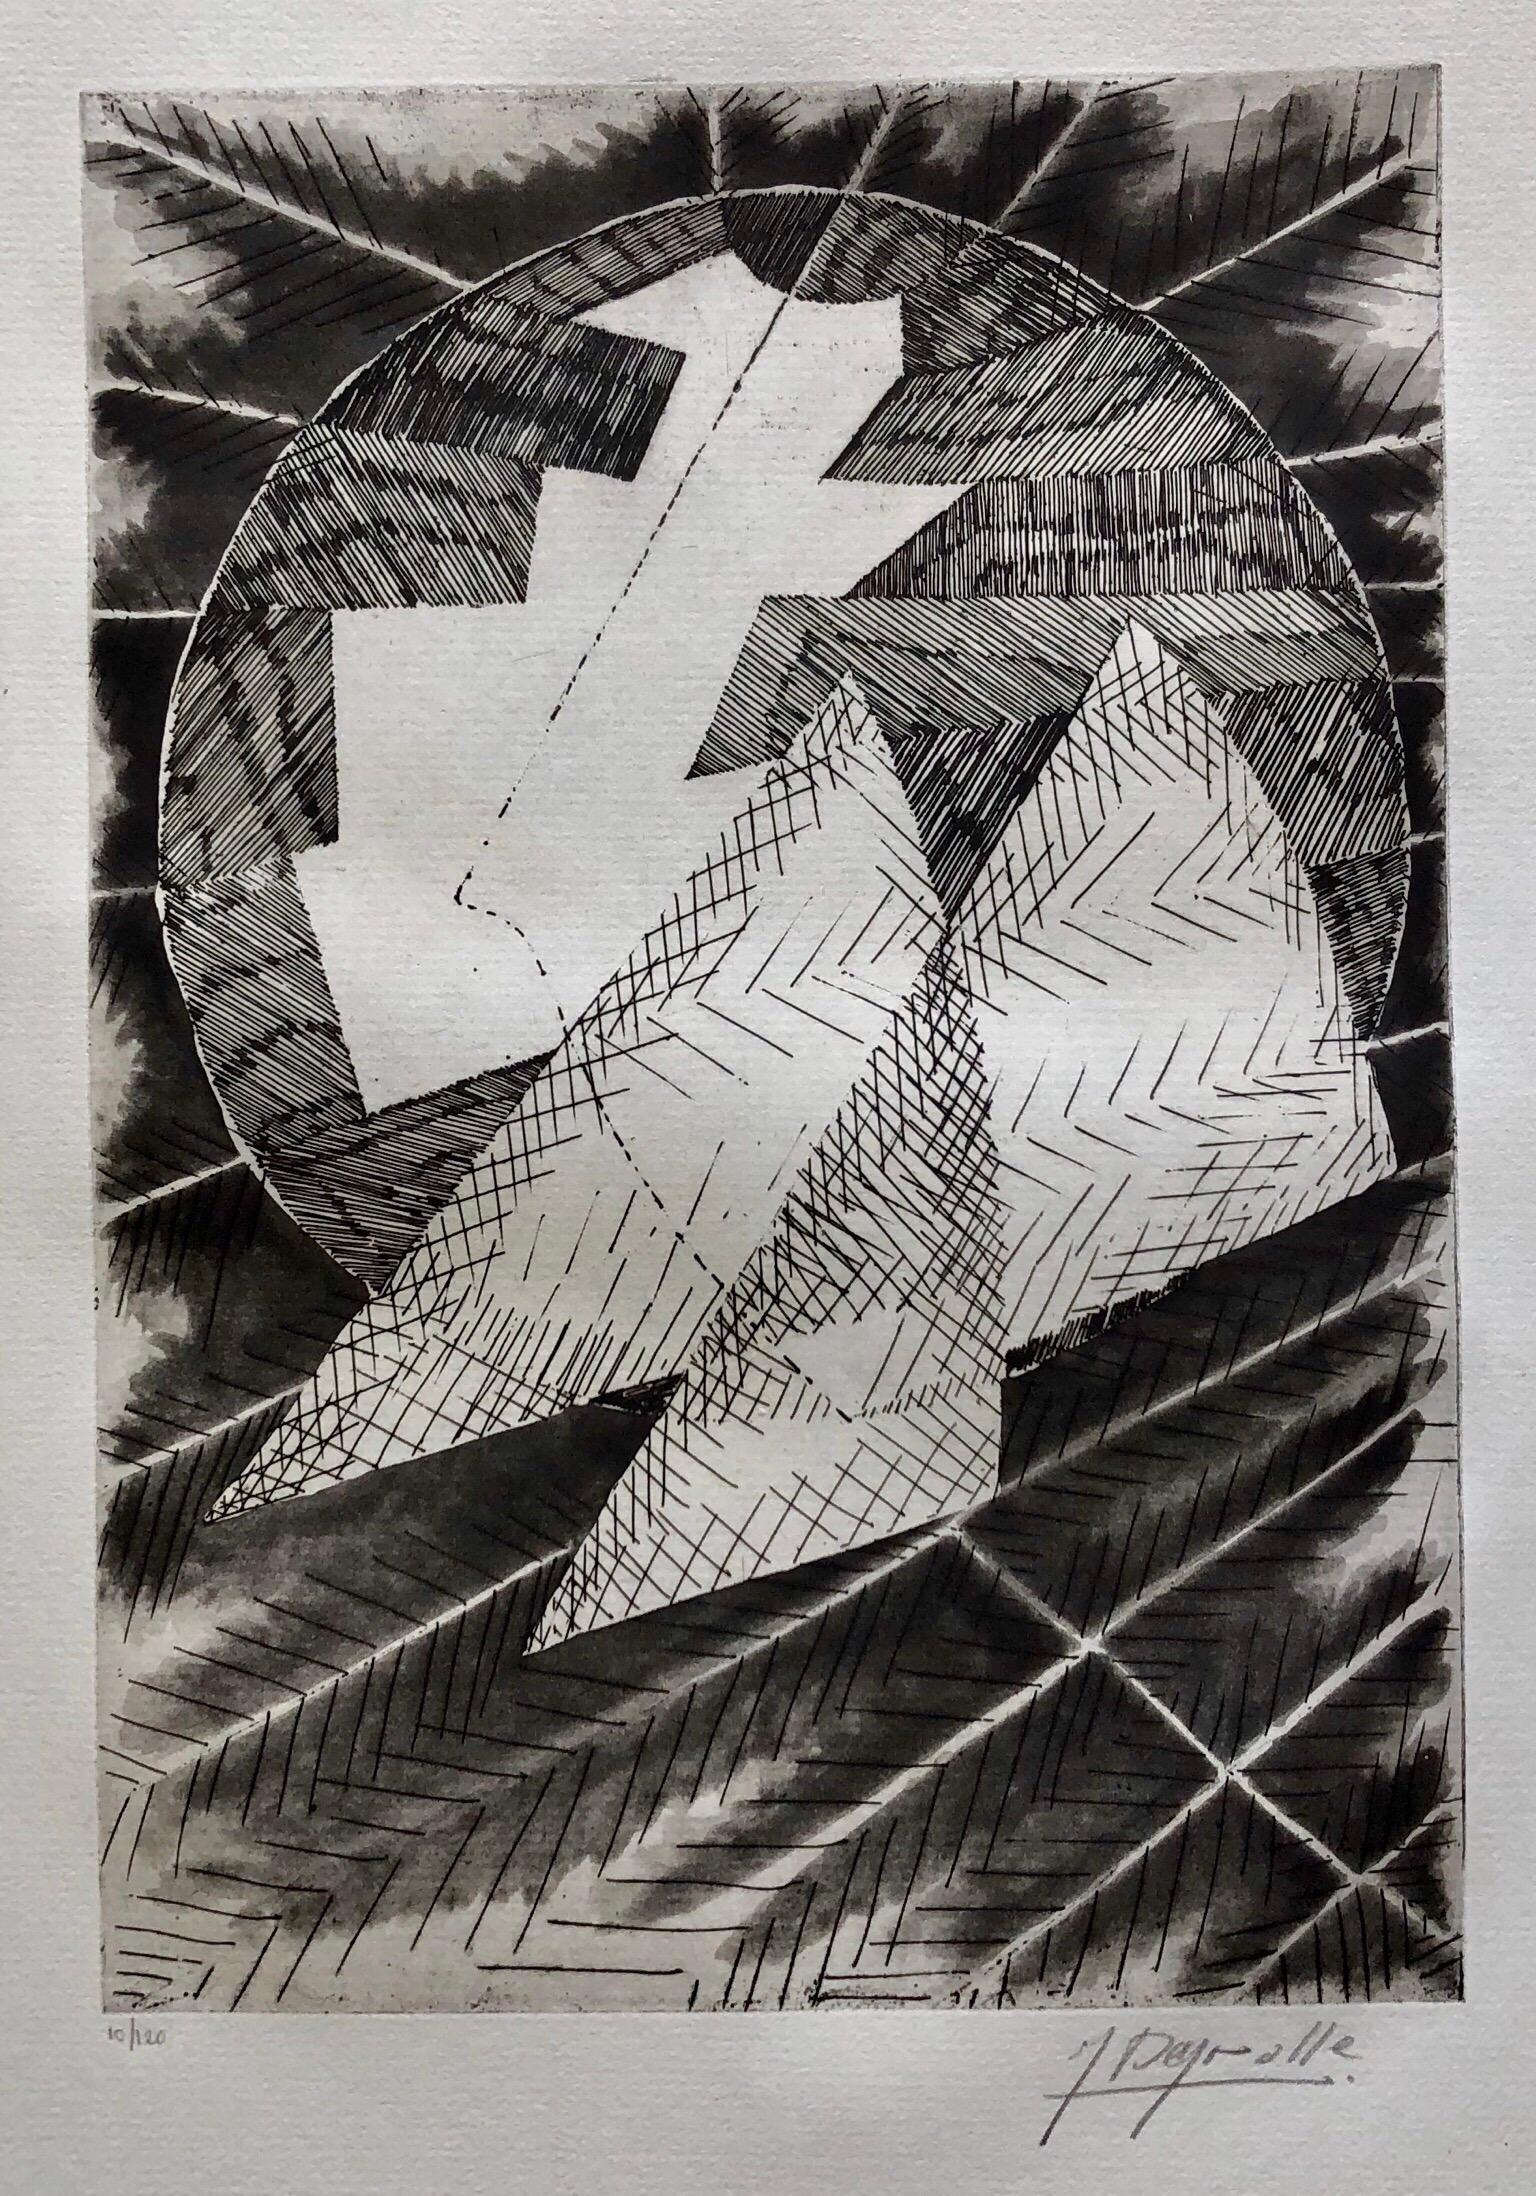 Jean Deyrolle Abstract Print - French Avant Garde Bold Abstract Geometric Aquatint Etching Op Art Kinetic